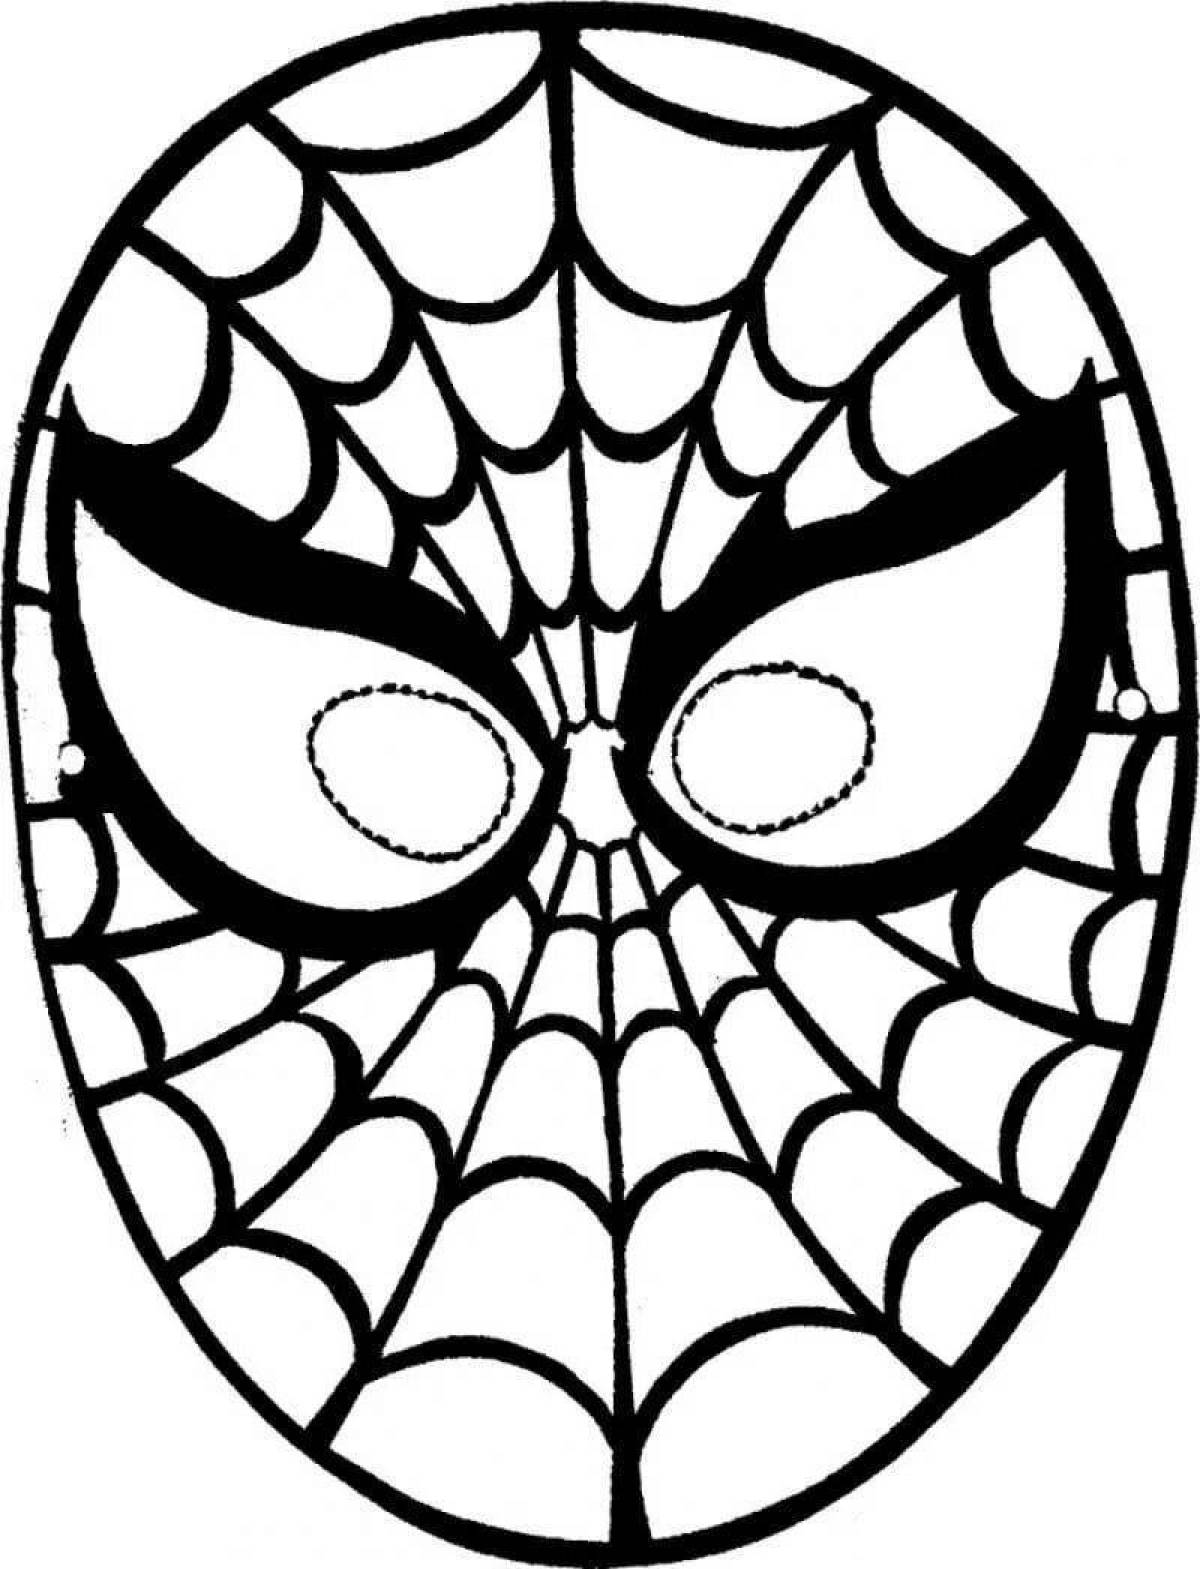 Spider-Man funny mask coloring page